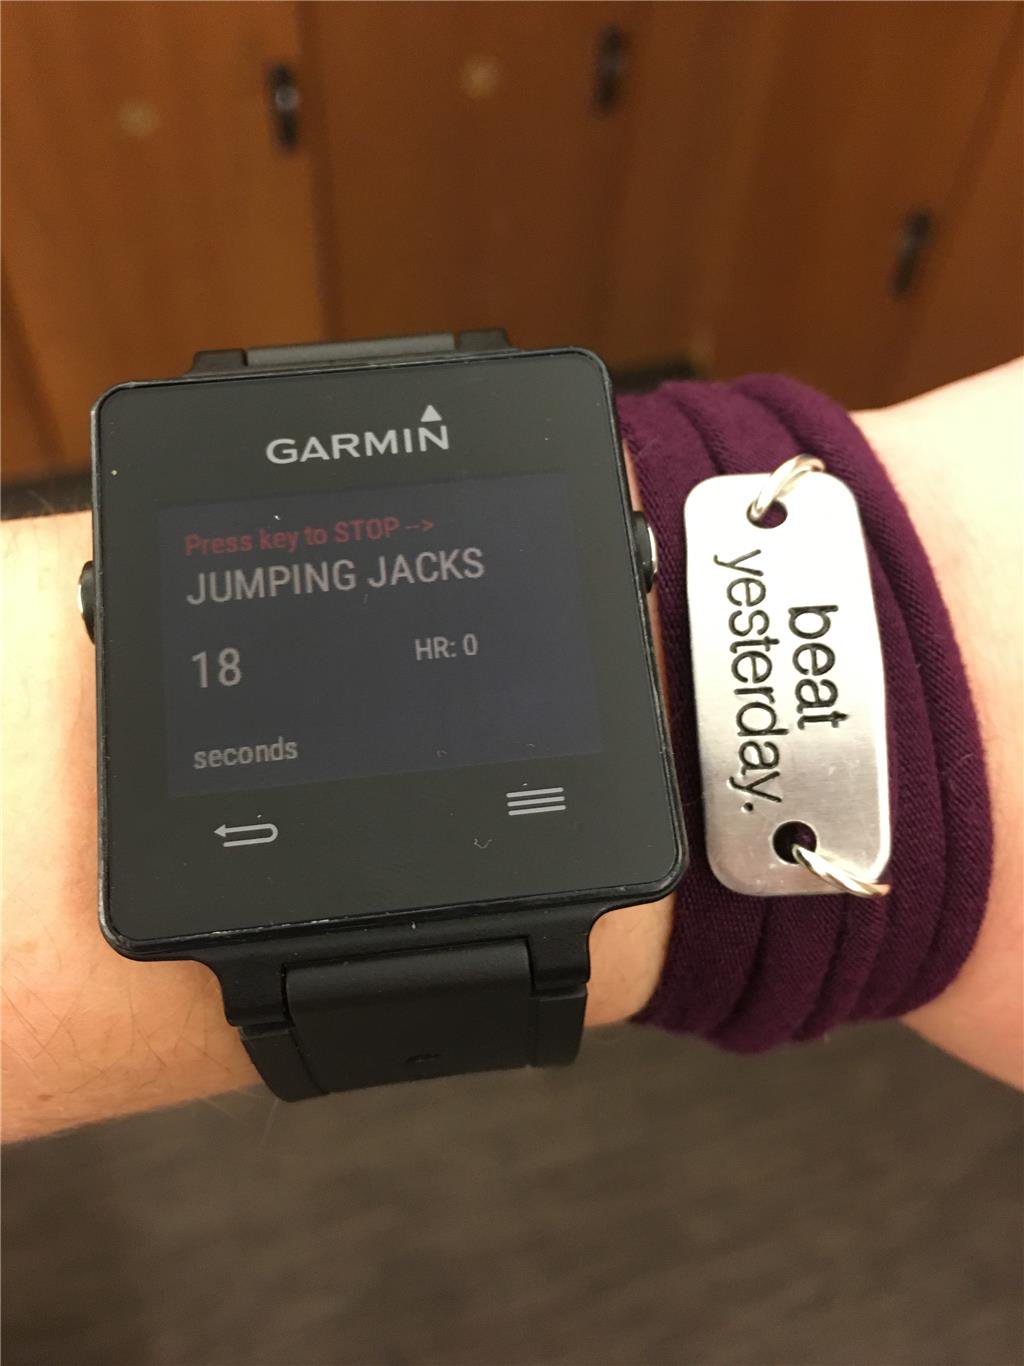 Garmin Fitness on Twitter: "Download the Workout Timer Connect IQ store for a full-body workout! https://t.co/BIpGWRP4no https://t.co/Z6aq2f9QwE" / Twitter